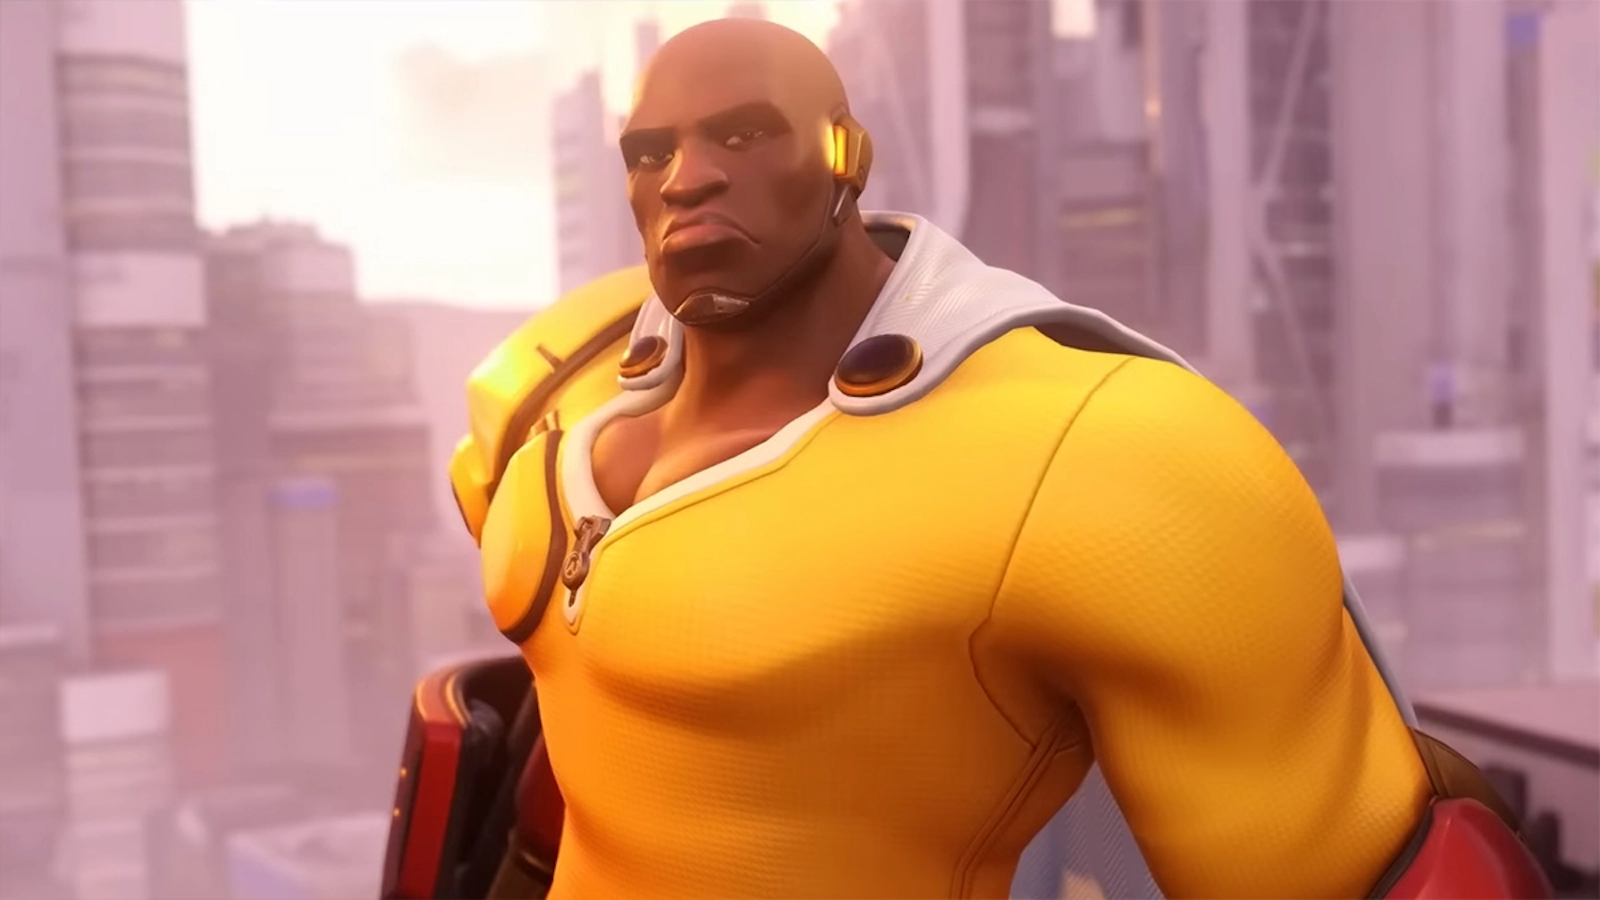 Overwatch 2 characters are canonically One Punch Man fans, because why not?